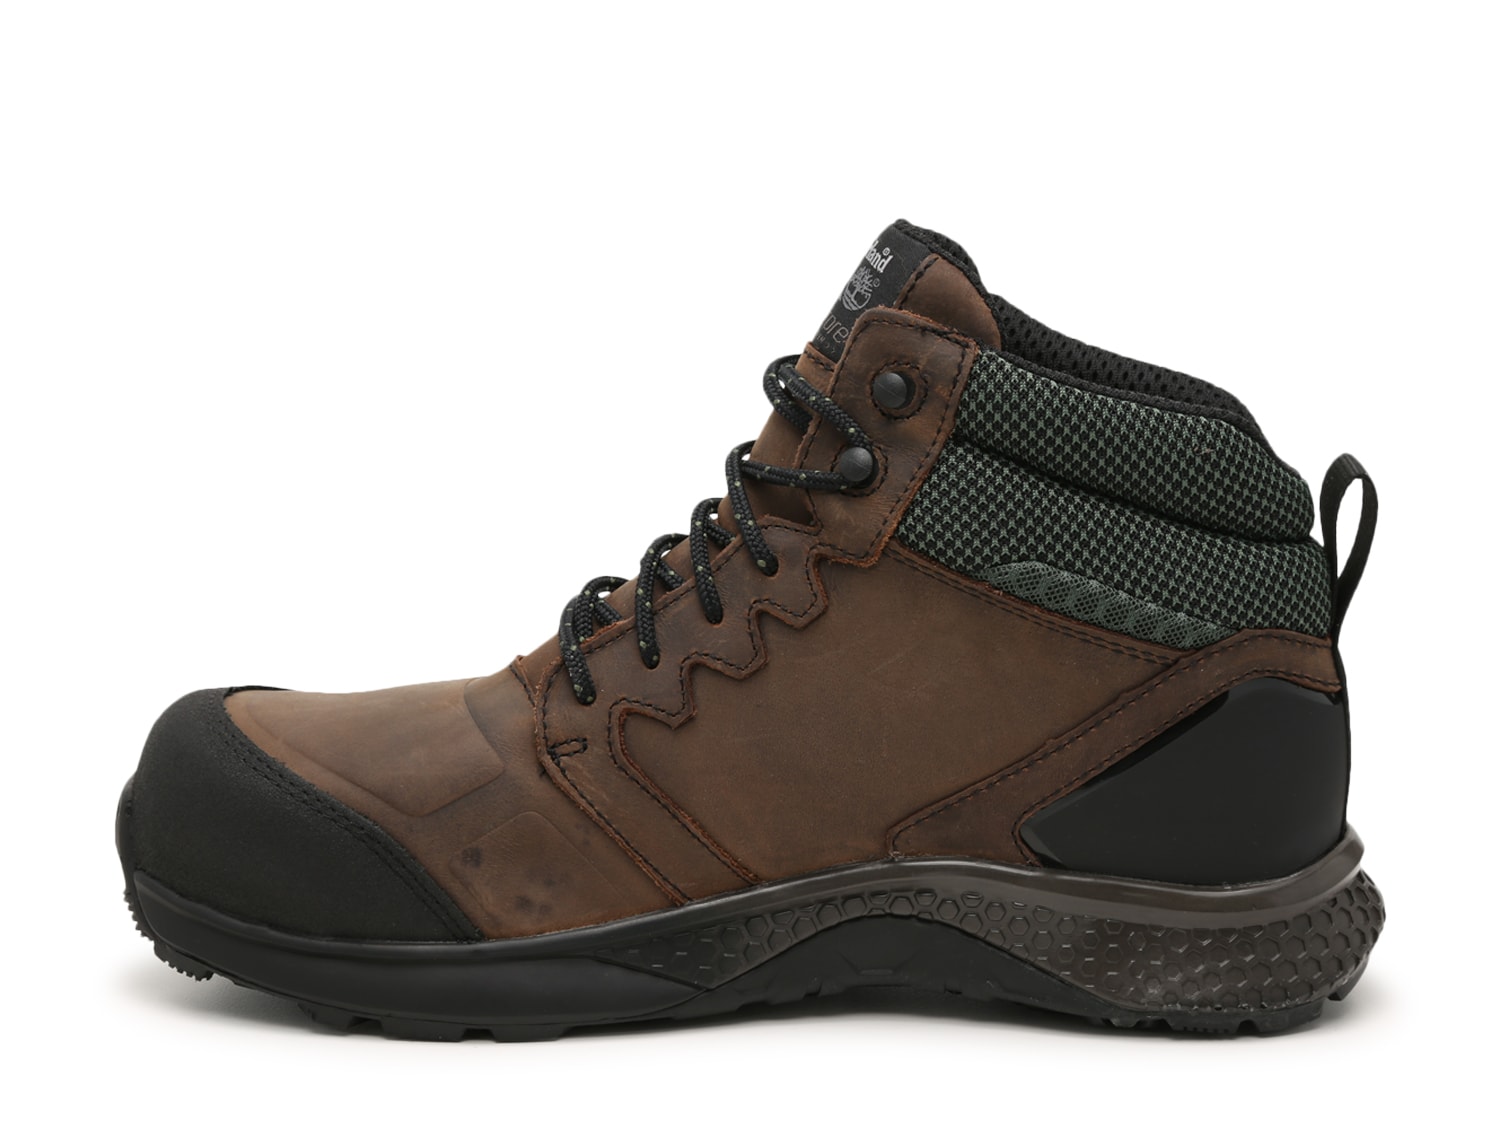 Timberland PRO PRO Reaxion Composite Toe Work Boot - Men's | DSW